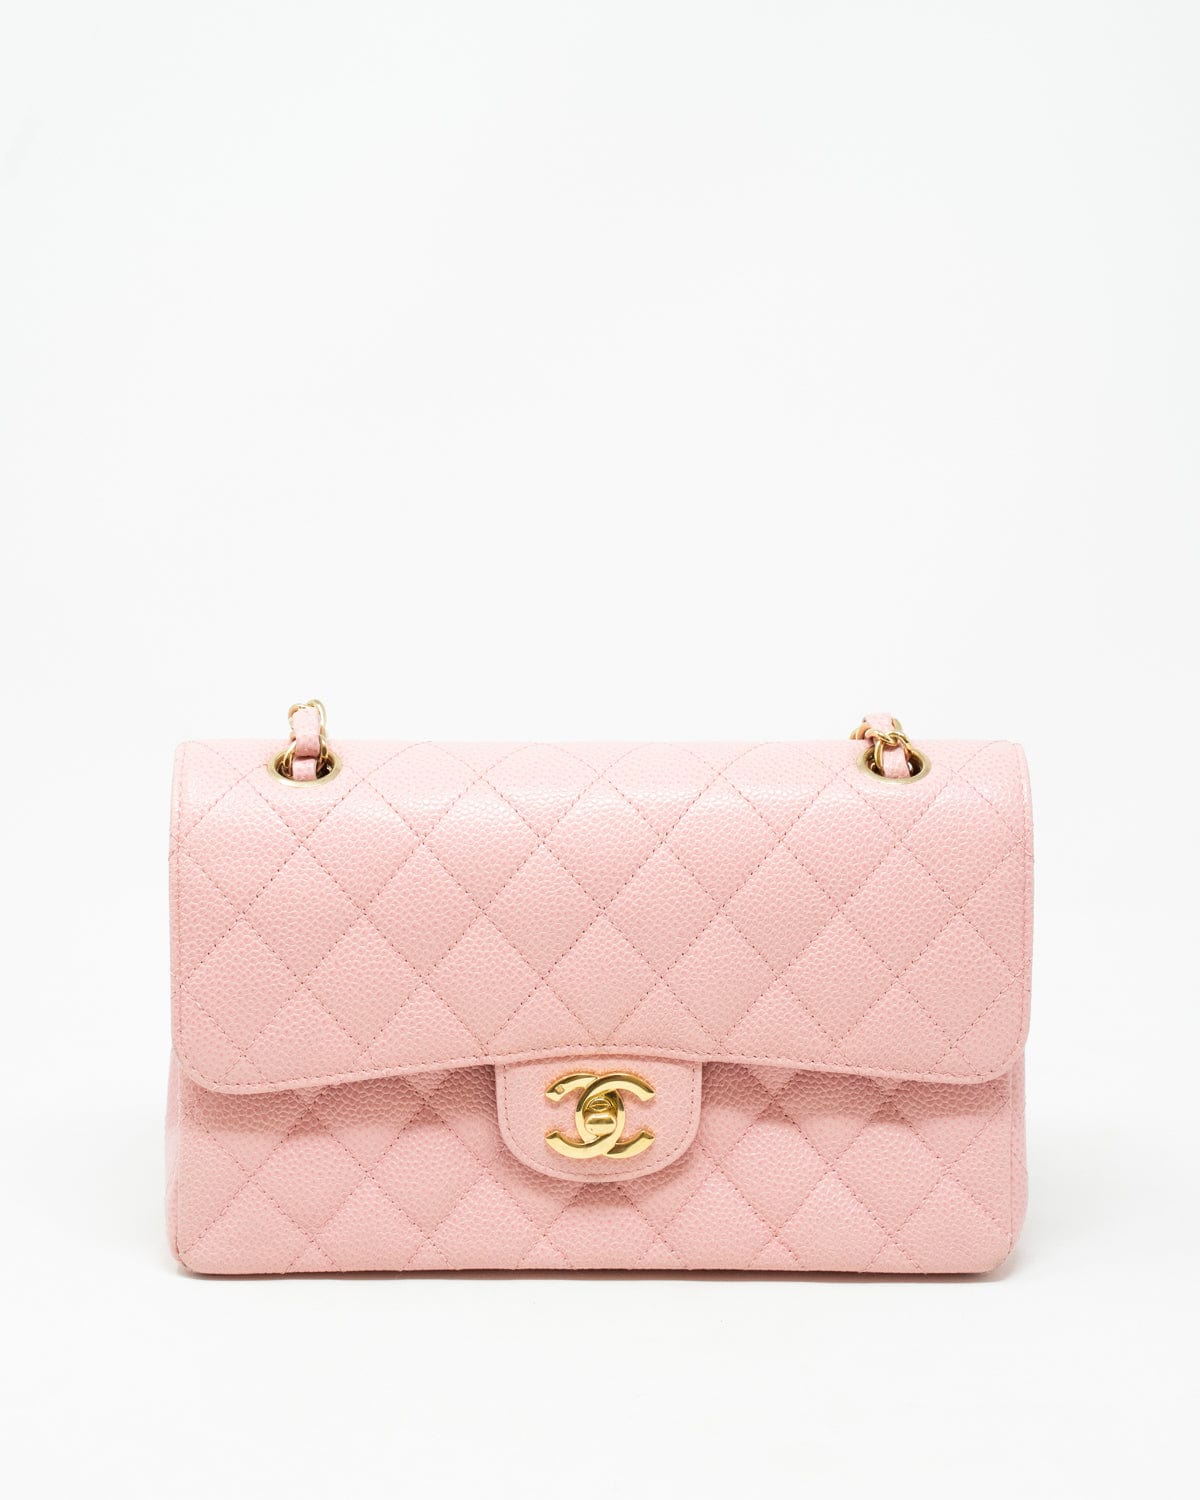 CHANEL Classic Pouch Grained Calfskin_Chanel_BRANDS_MILAN CLASSIC Luxury  Trade Company Since 2007